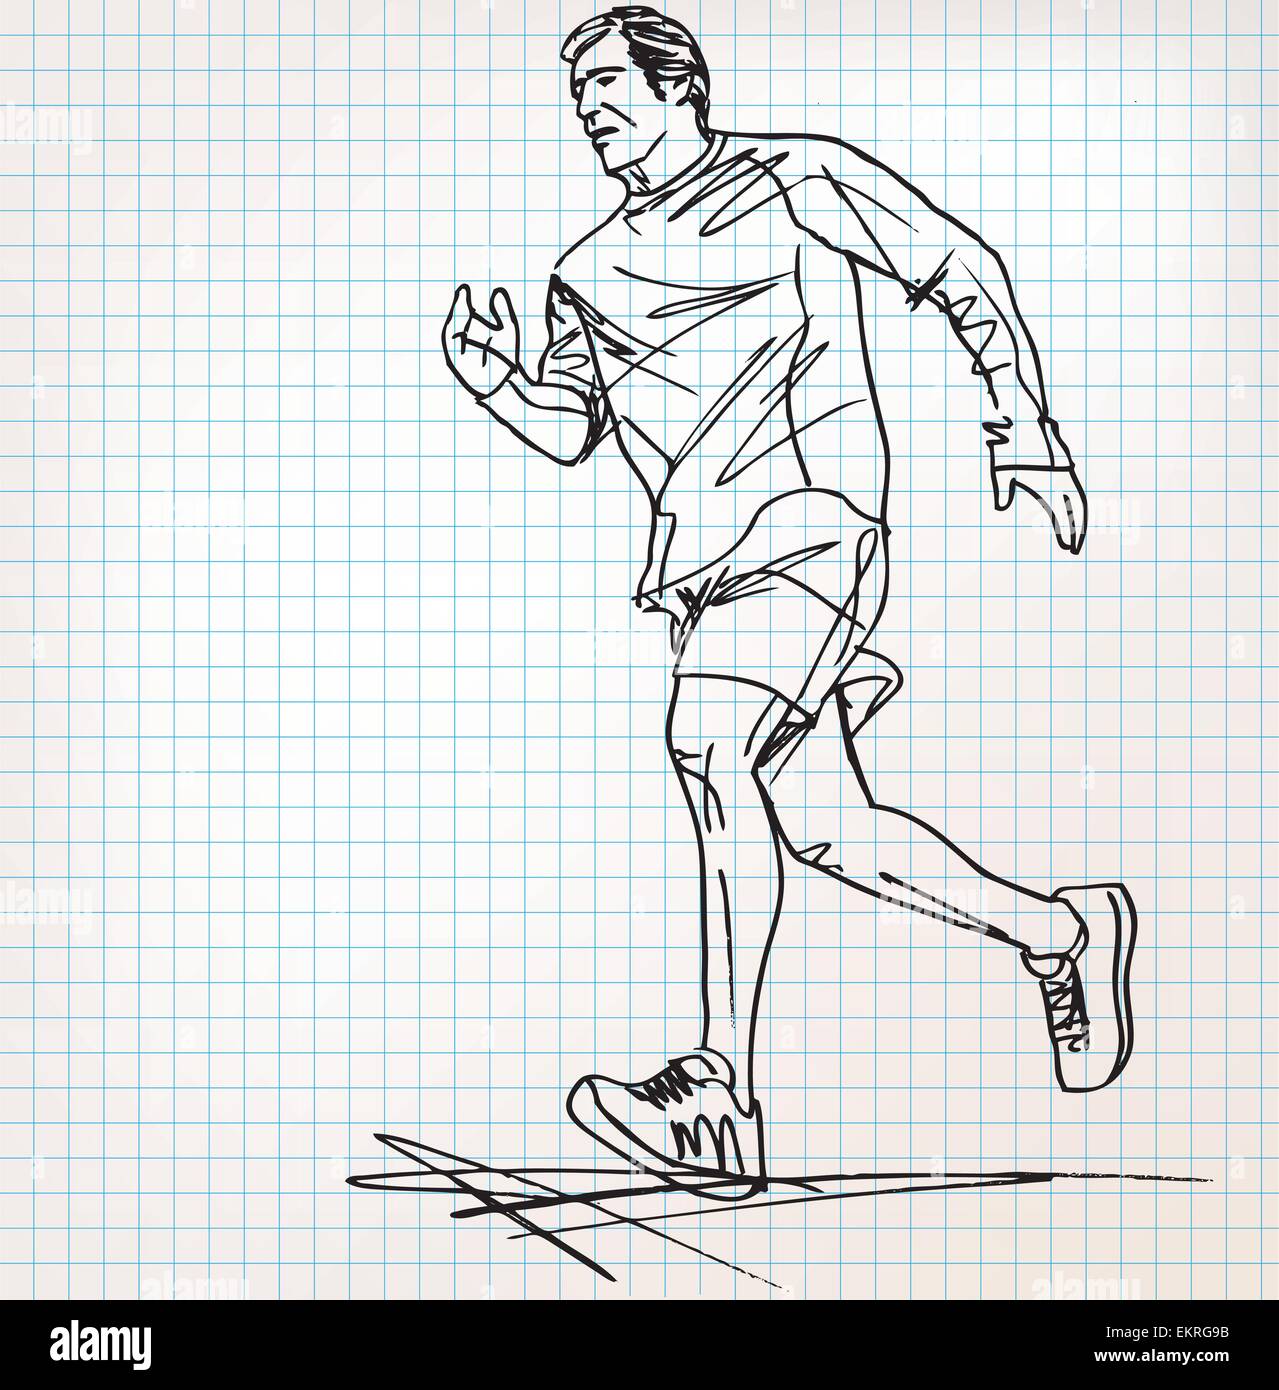 Marathon runner male cartoon character vector sketch illustration isolated  Marathon runner or run competition member male  CanStock